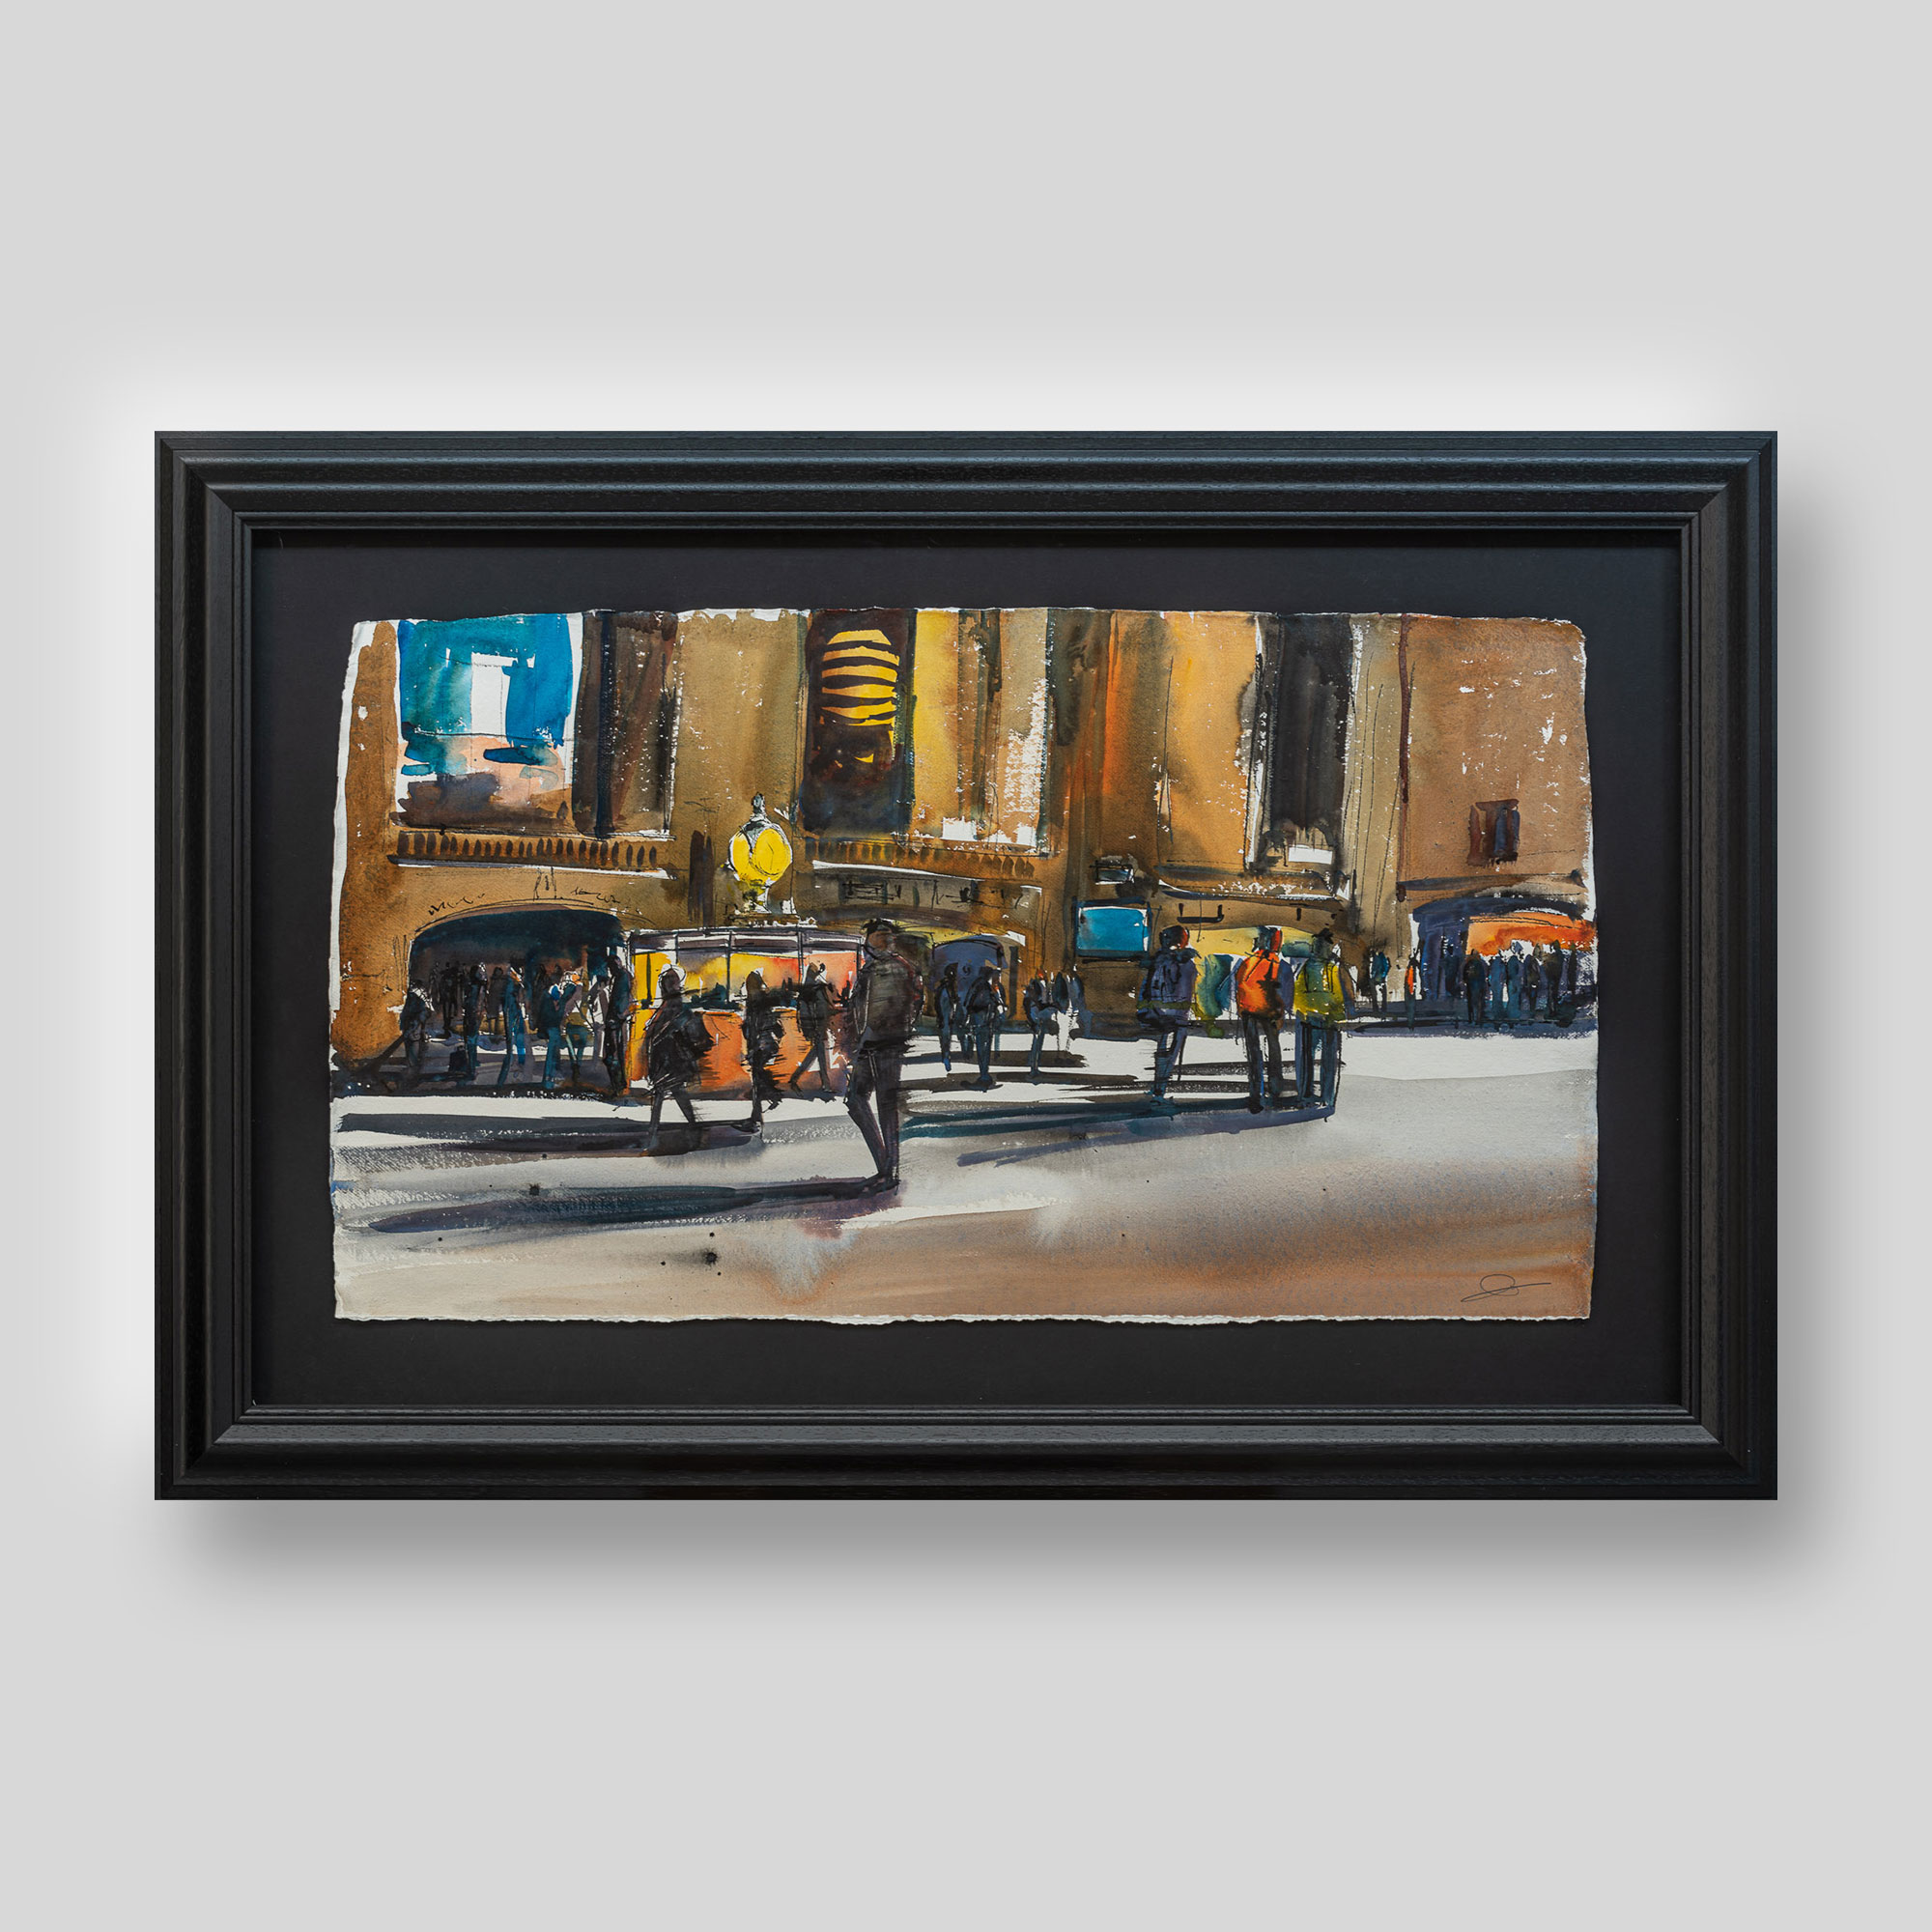 Grand Central Subway - Original Original Grand Central Painting by UK Contemporary Artist Paul Kenton, from the Watercolour Collection